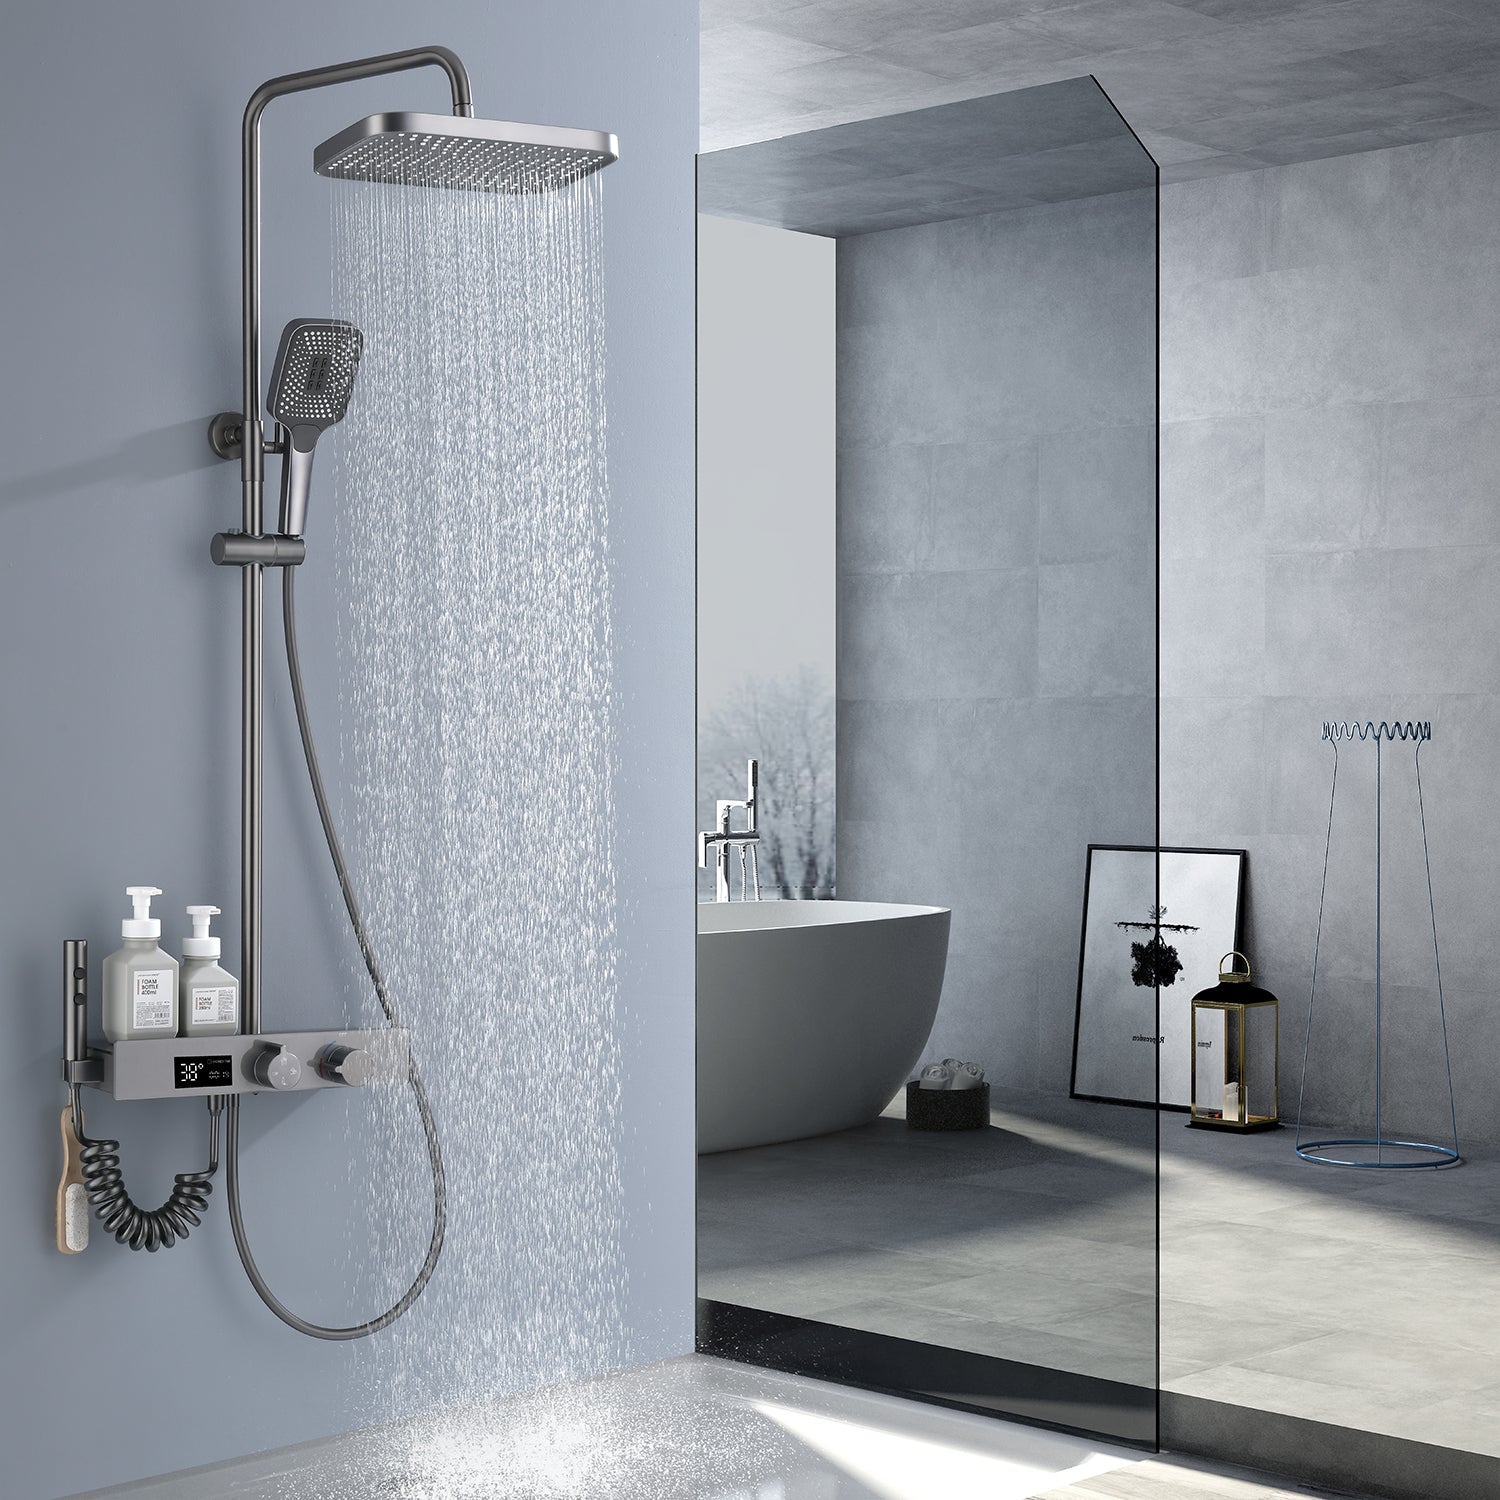 Lefton Thermostatic Shower System with Temperature Display